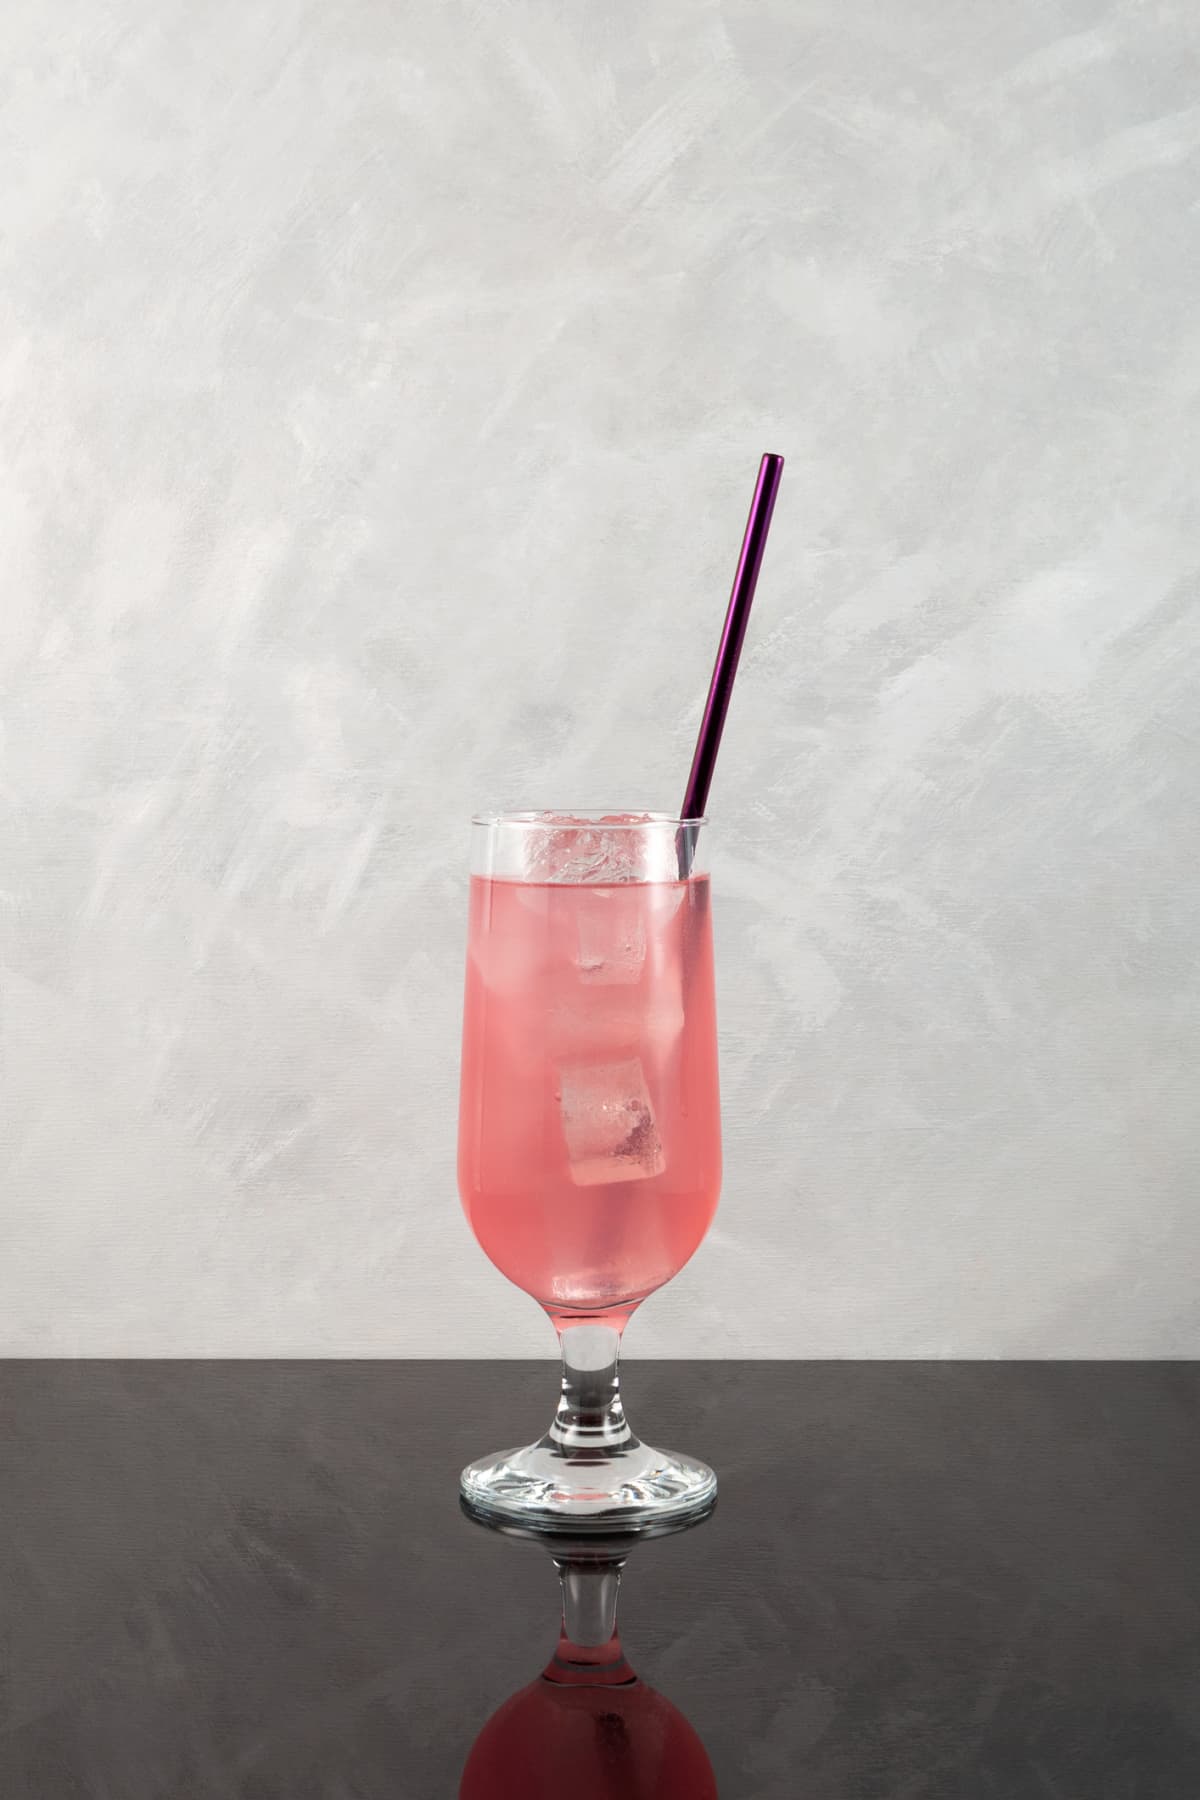 Rose-flavored soda in a glass with ice and a straw